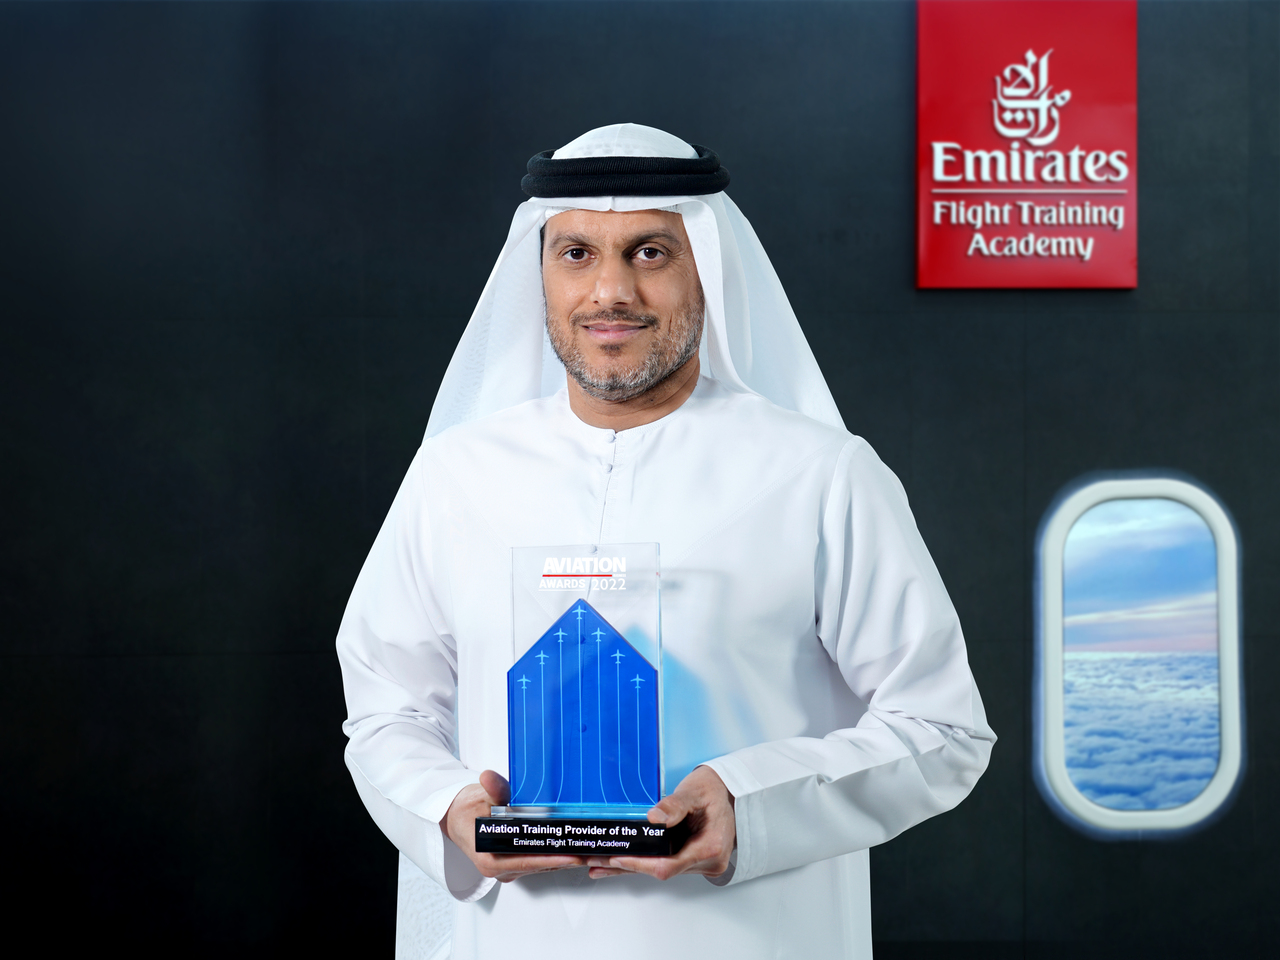 Capt Abdulla Al Hammadi, Vice President Emirates Flight Training Academy, accepted the much-coveted Aviation Training Provider of the Year Award at the Aviation Business Middle East Awards 2022